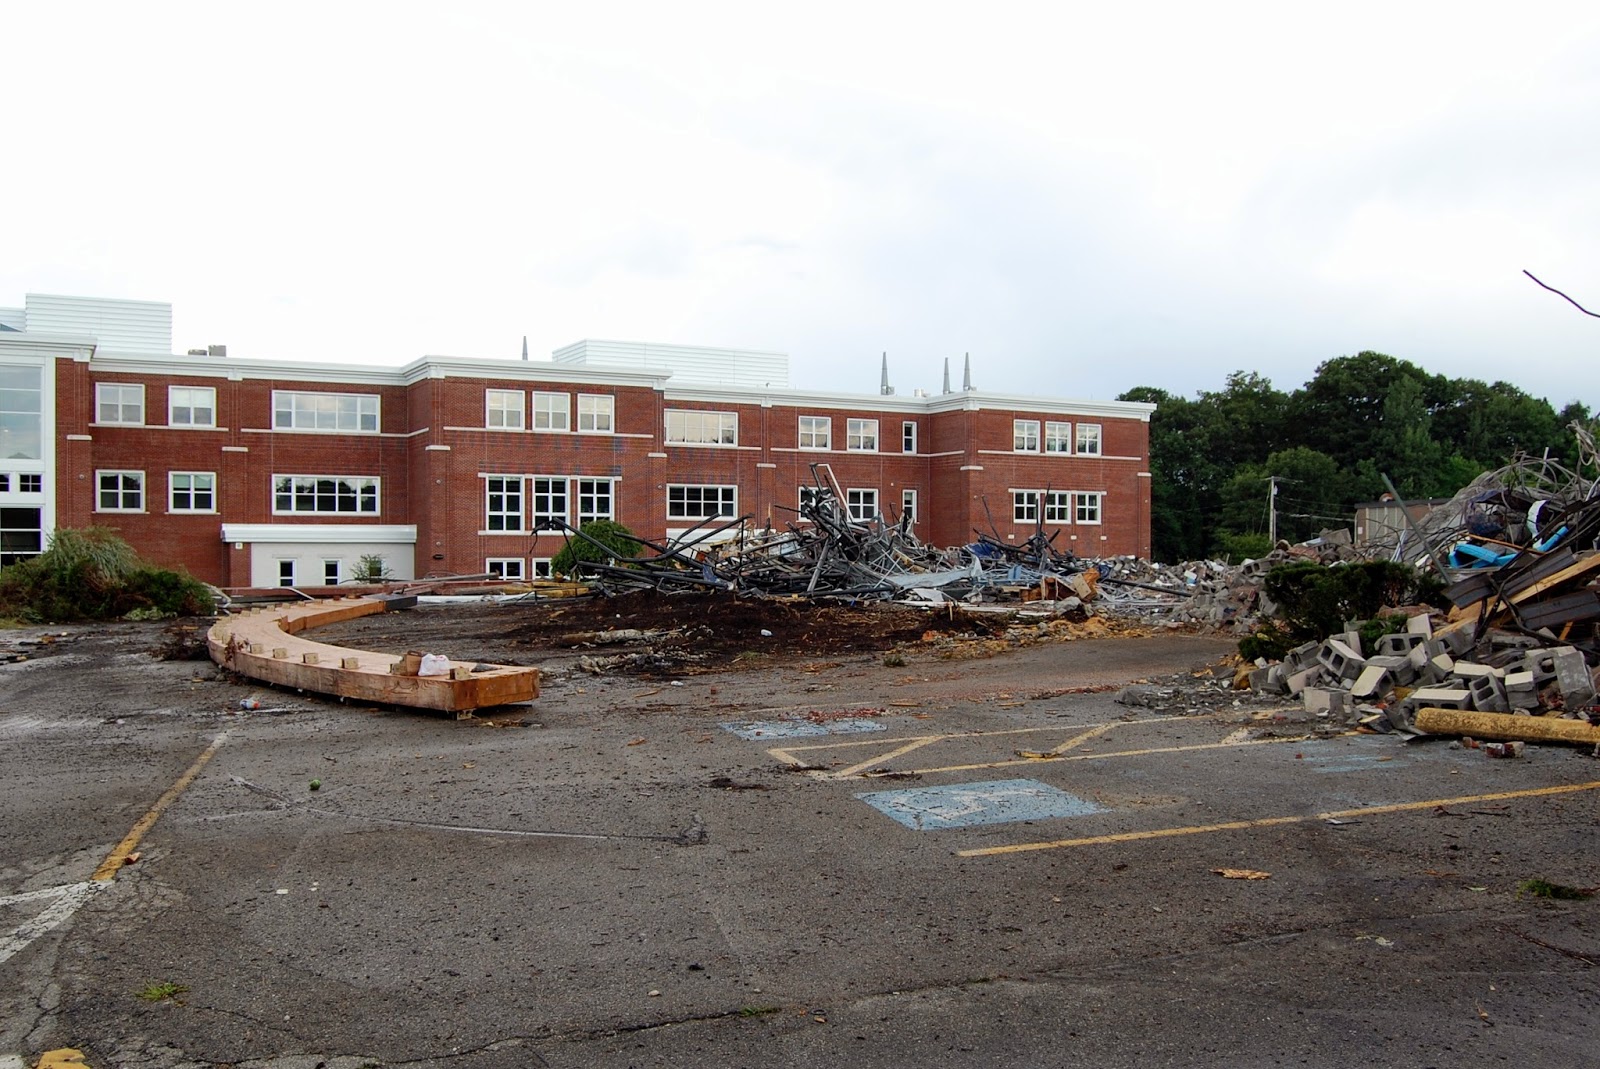 closer to the piles that remain, the new school building becomes the dominant view